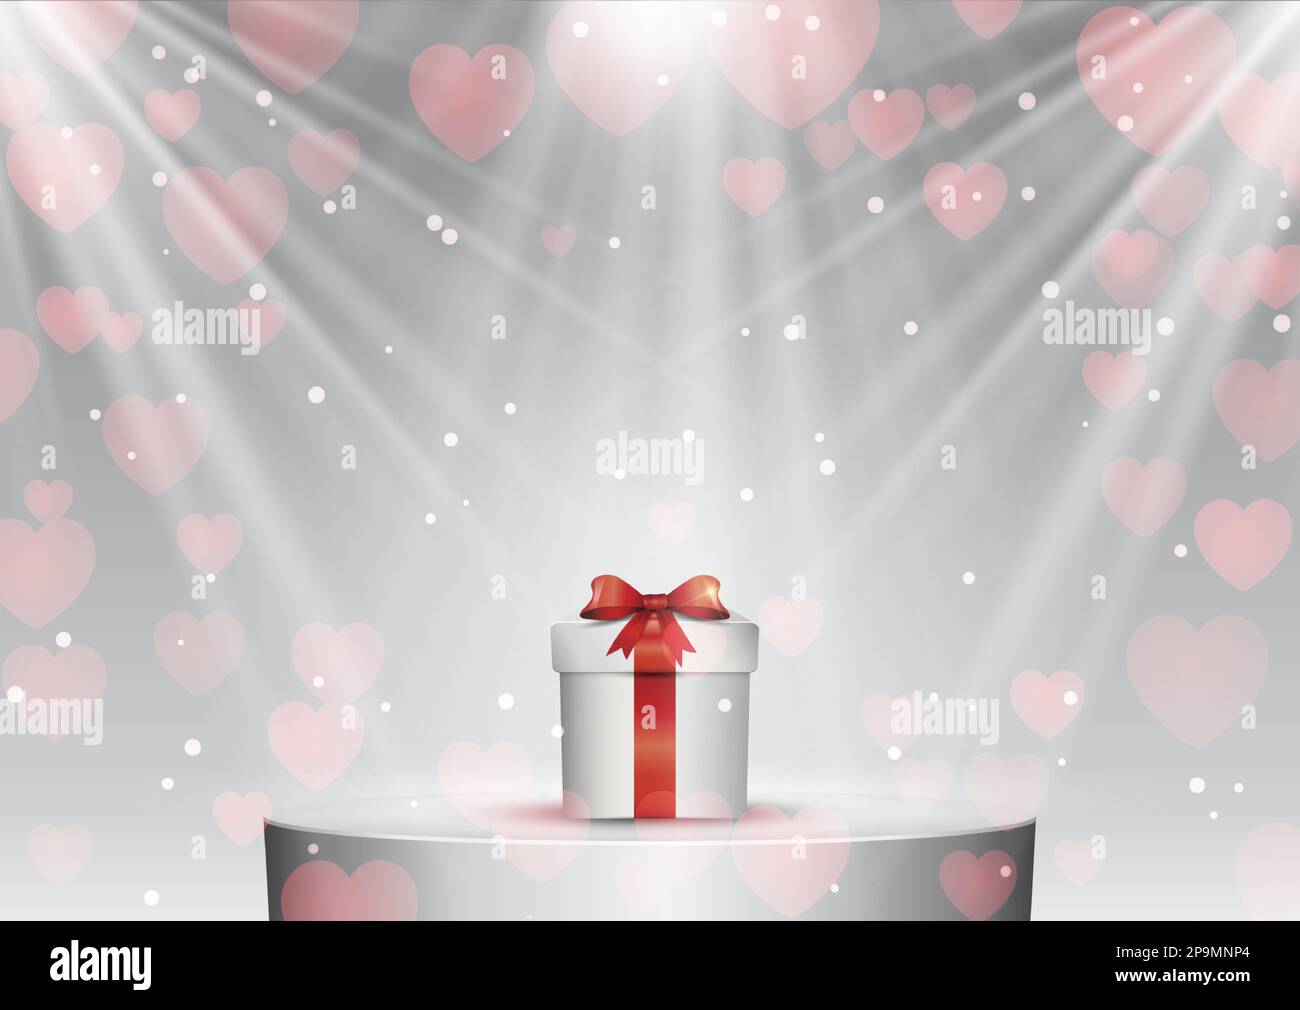 Valentines Day background with gift on a podium under spotlights Stock Vector